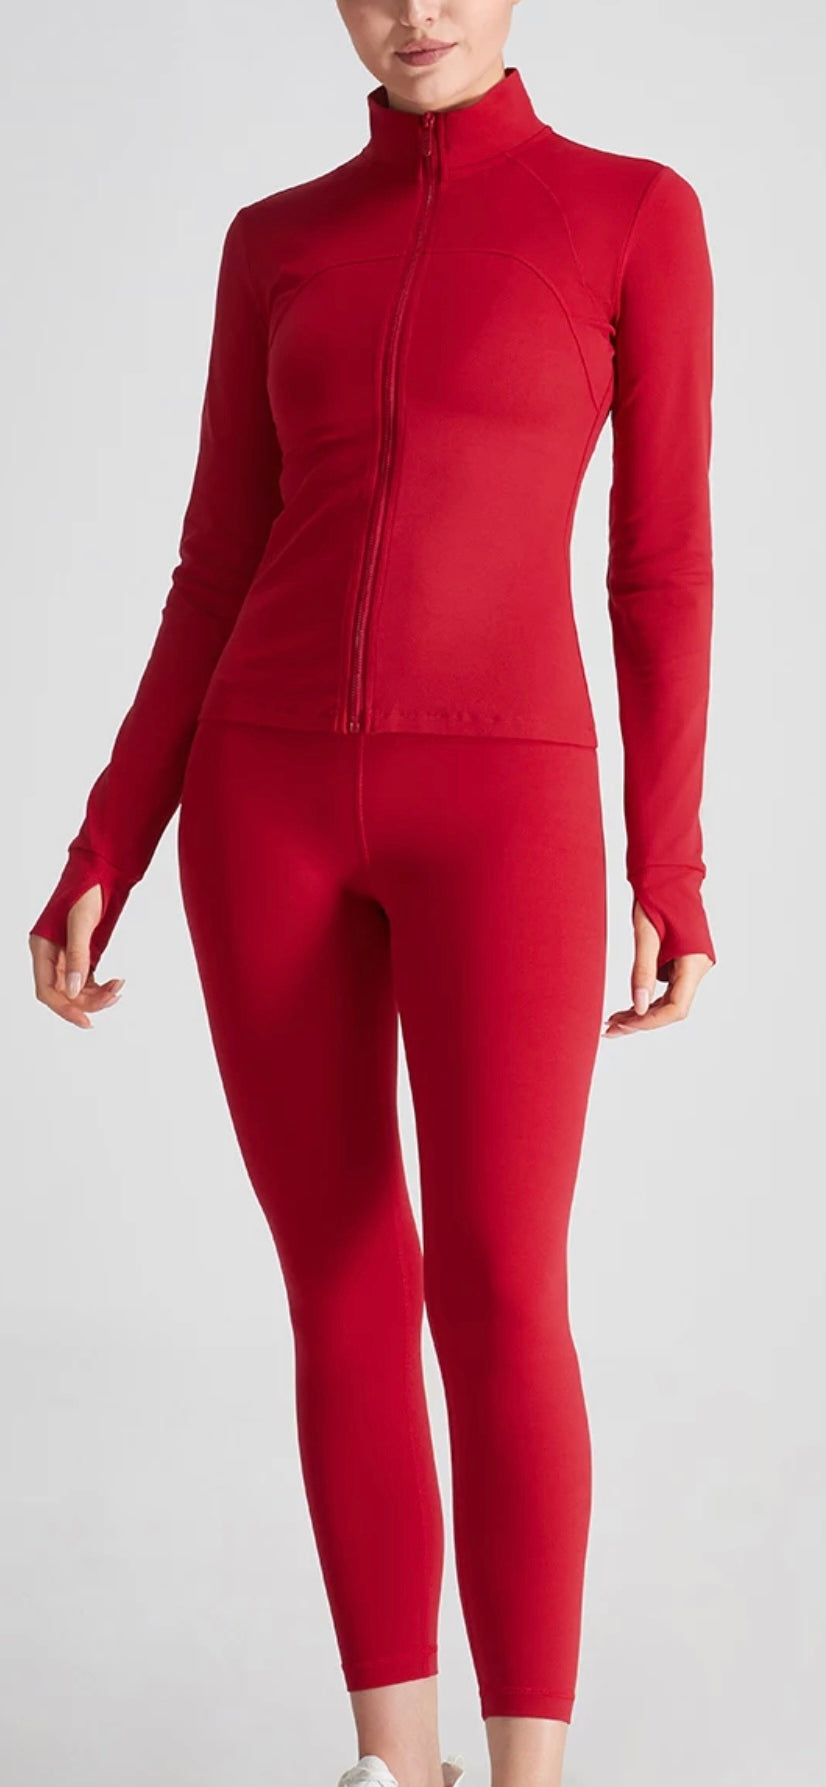 I AM the Boss:  Slim Fitting 2-Piece Tracksuit